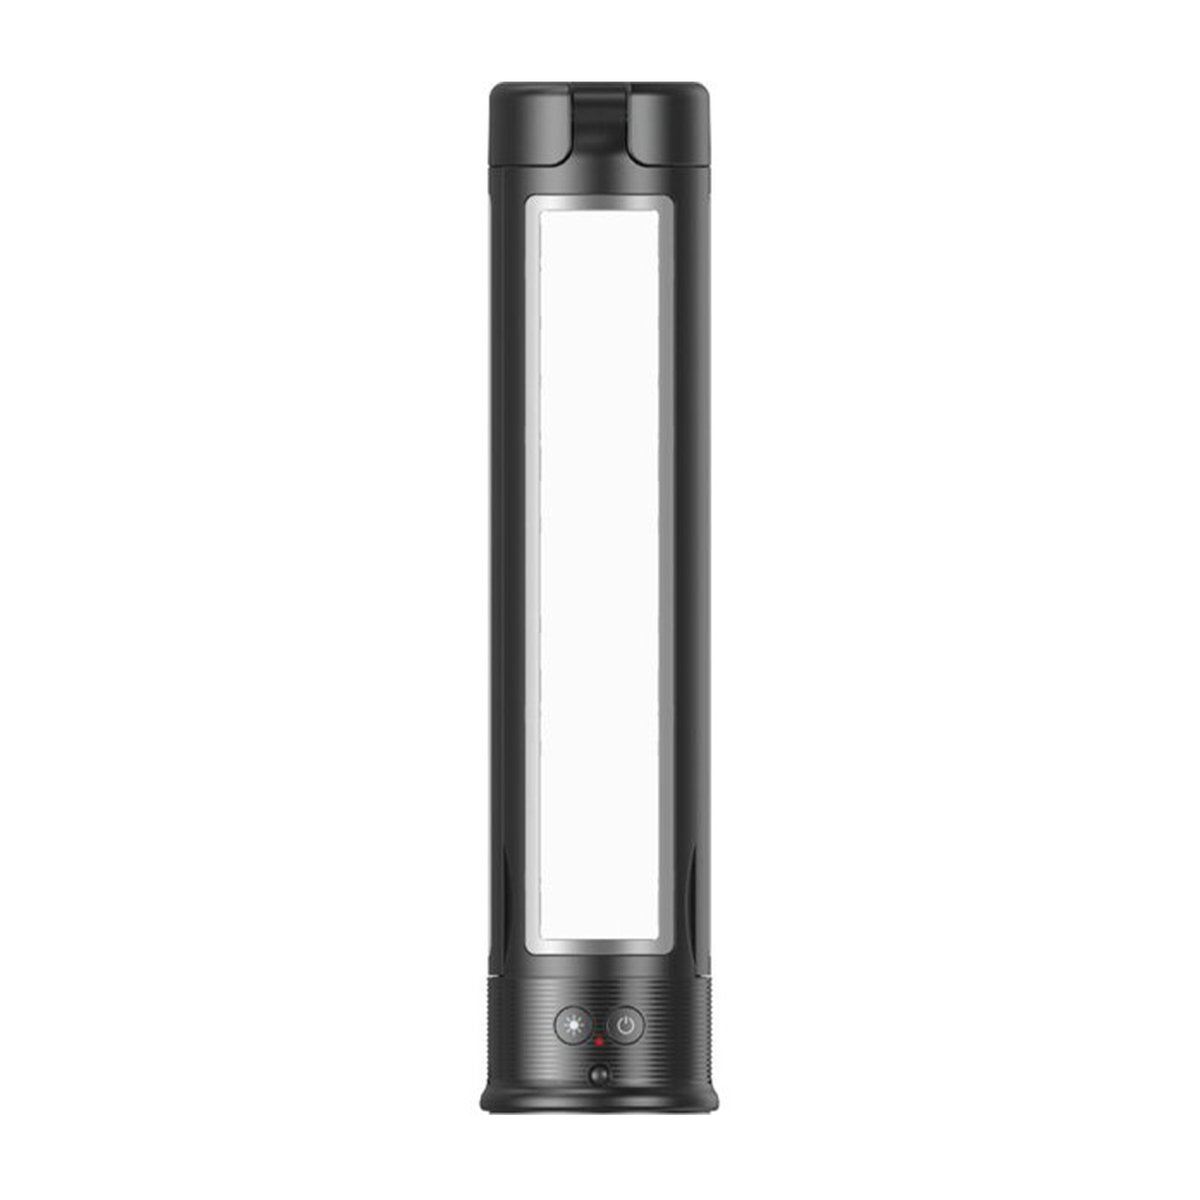 Switch Multifuntional LED Light Black (ACSWT21VLGSCL1)